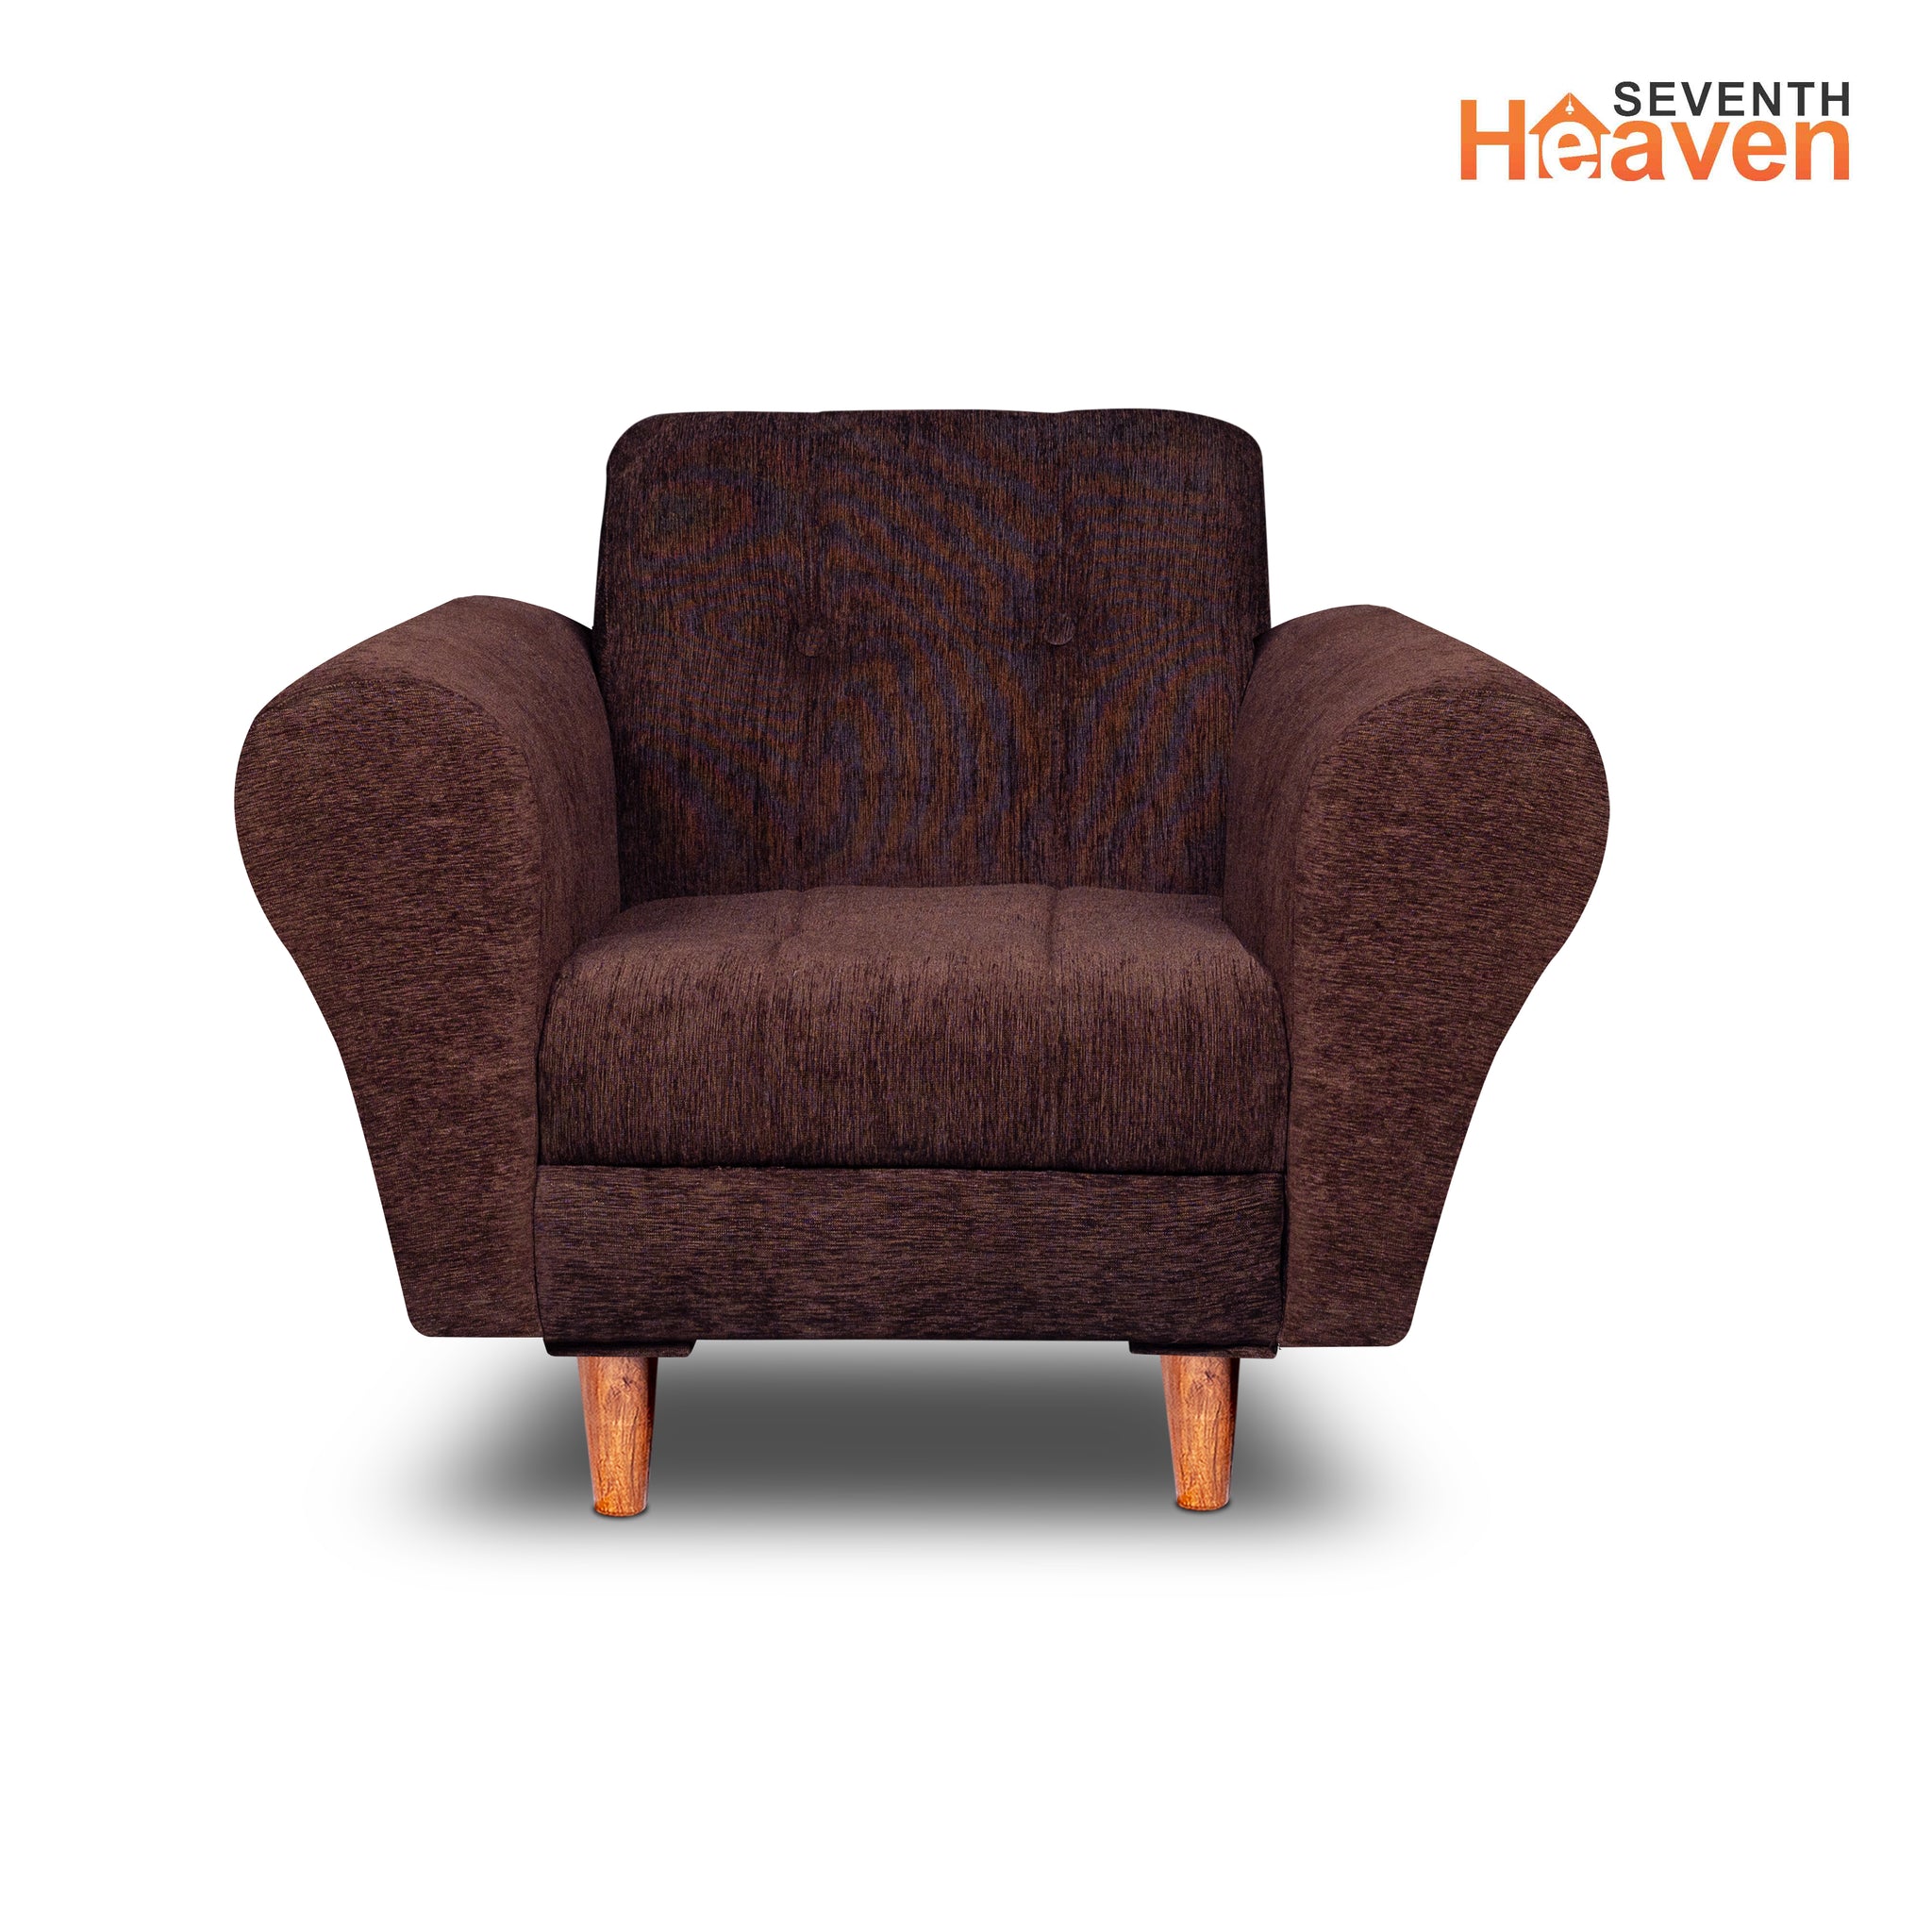 Seventh Heaven Milan 1 Seater Wooden Sofa Set Modern & Elegant Smart Furniture Range for luxurious homes, living rooms and offices. Brown Colour Molphino fabric with sheesham polished wooden legs.